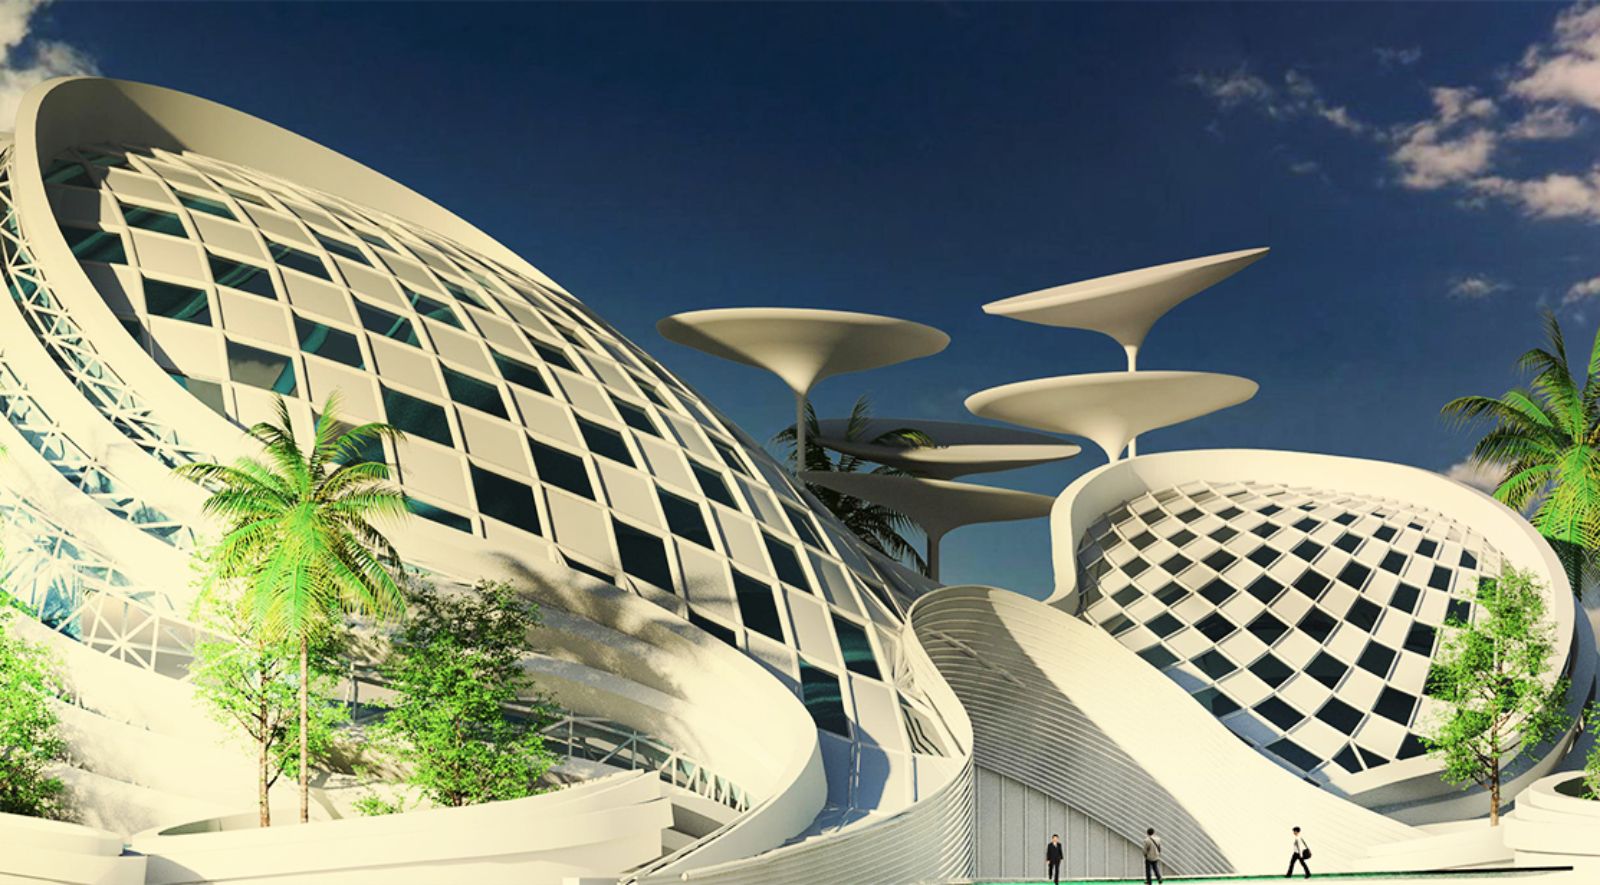 Convention Center in Cairo by Mohamed Elbangy | A As Architecture